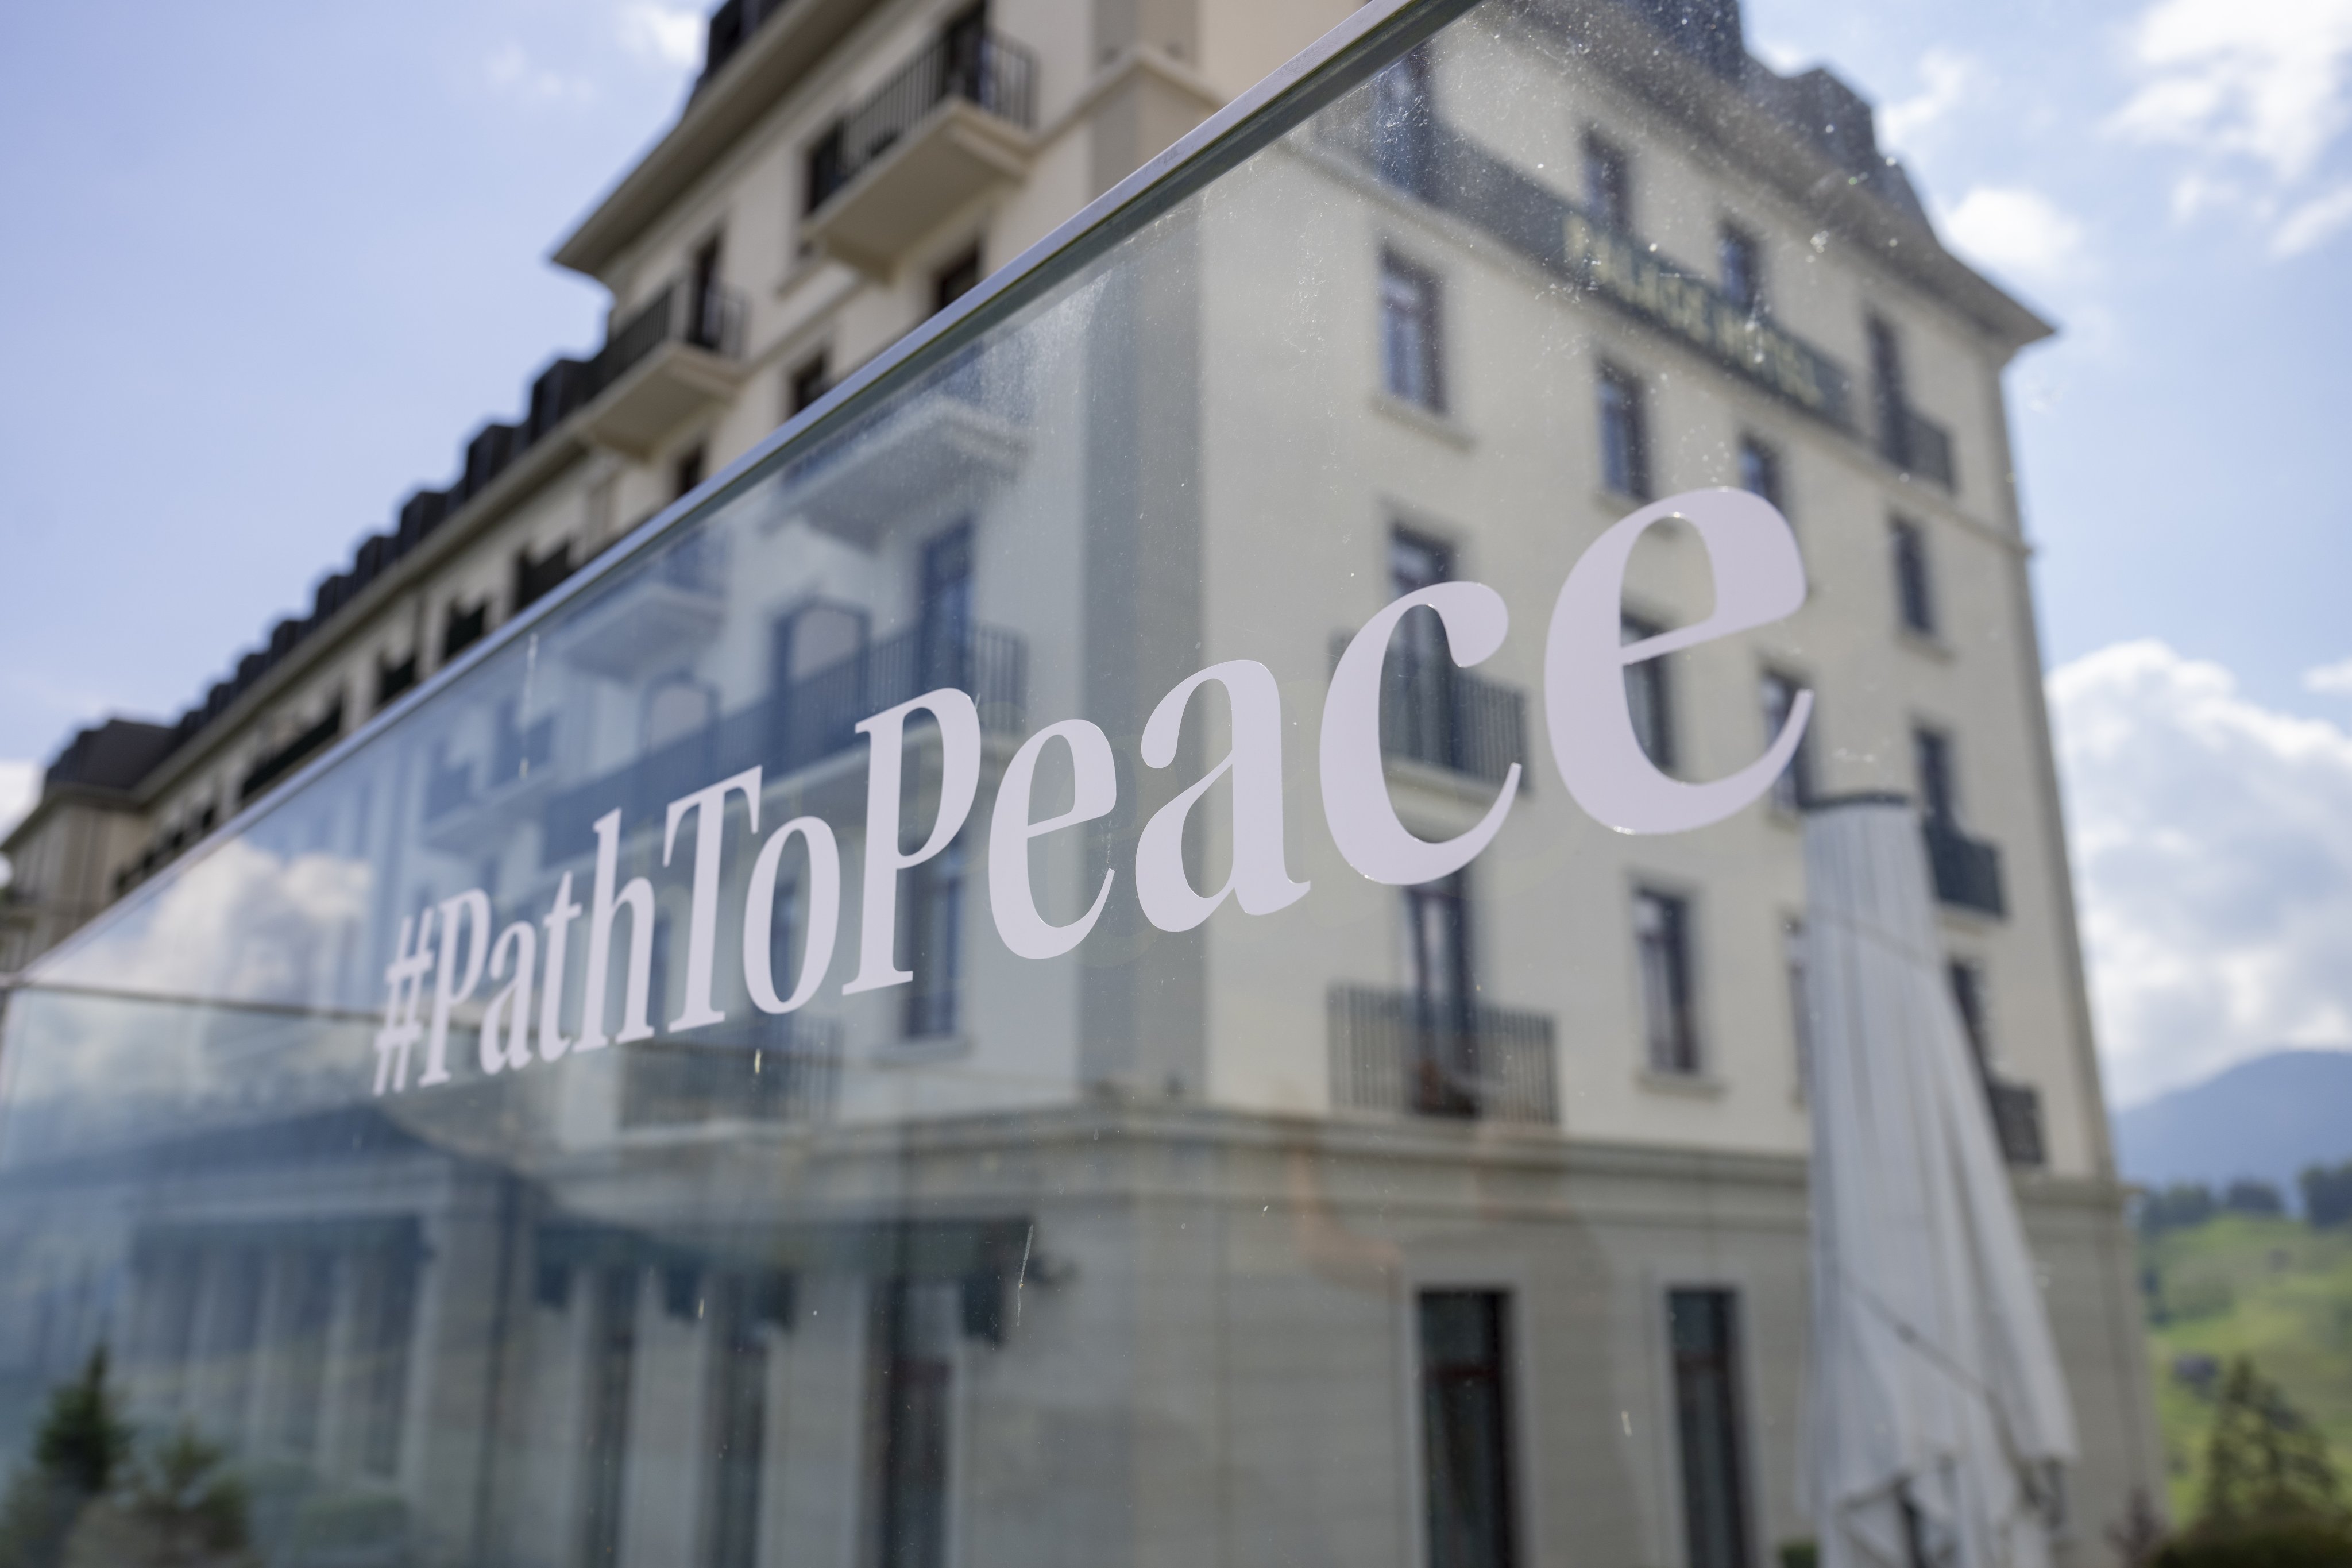 The hashtag #PathToPeace is pasted on the glass panel of a balustrade in front of a resort building as final preparations are done for the “Summit on Peace in Ukraine” in Switzerland. Photo: EPA-EFE